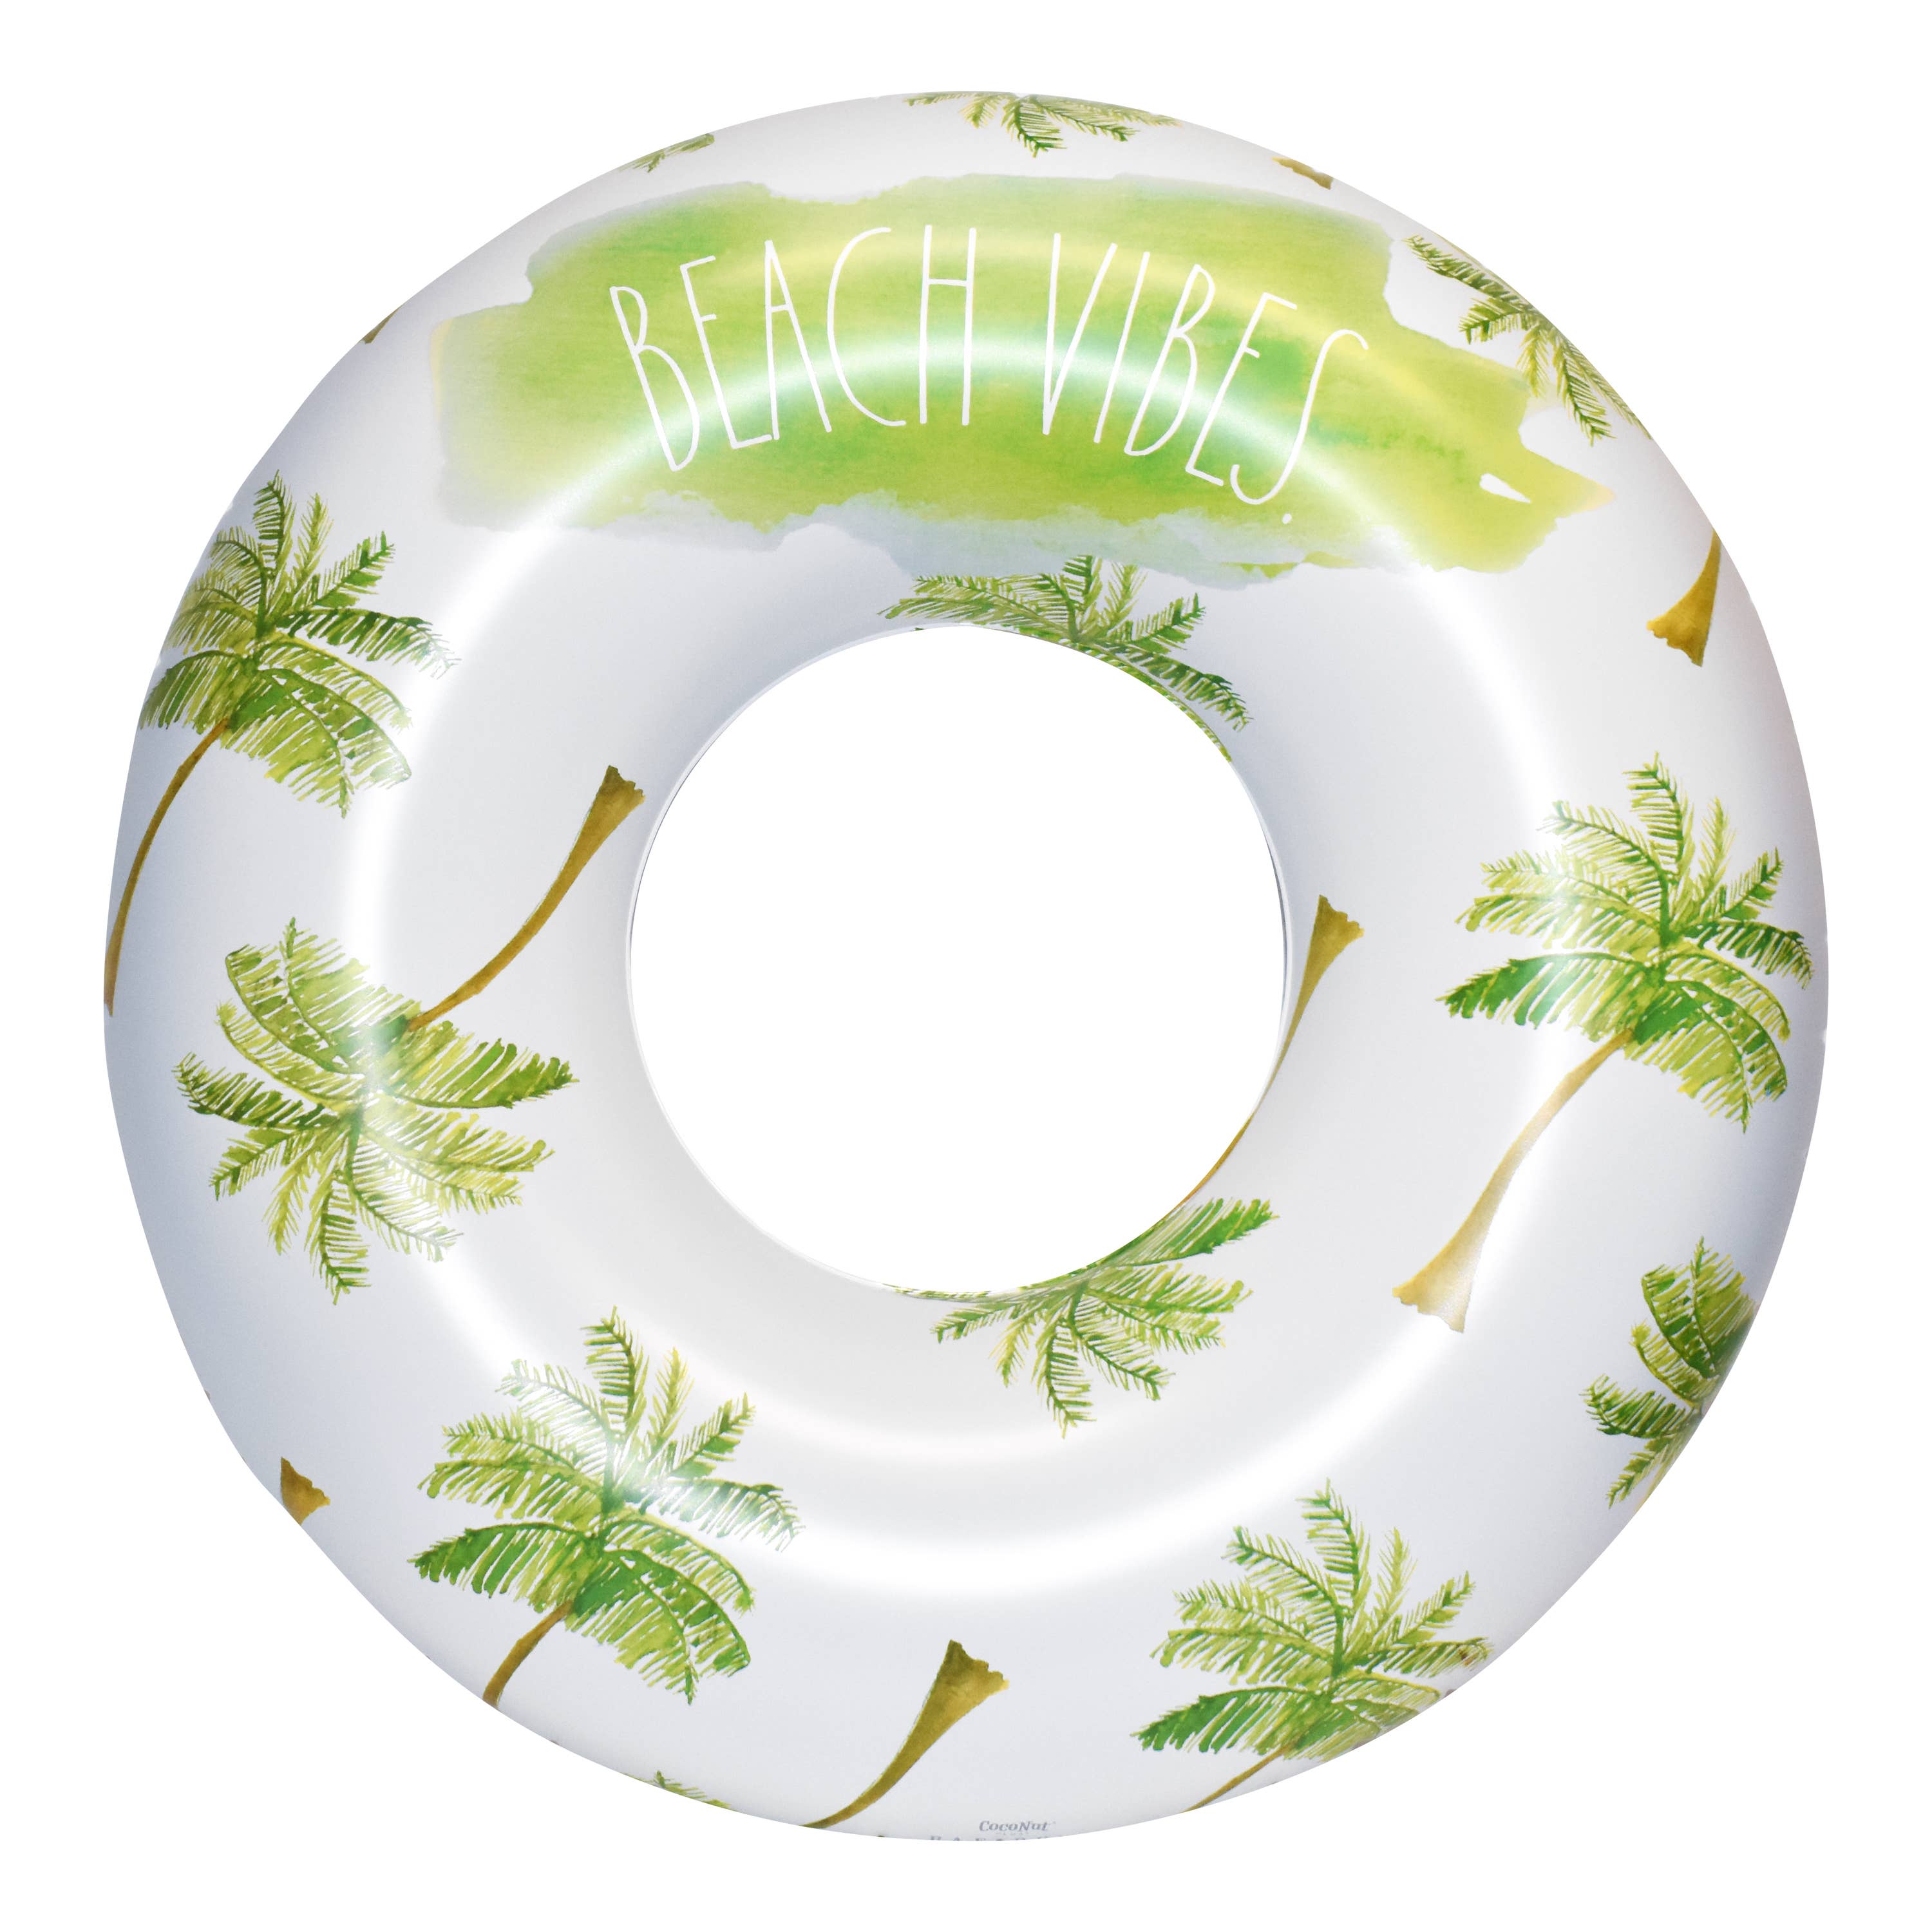 'Beach Vibes' Ring Float with Palm Tree Pattern